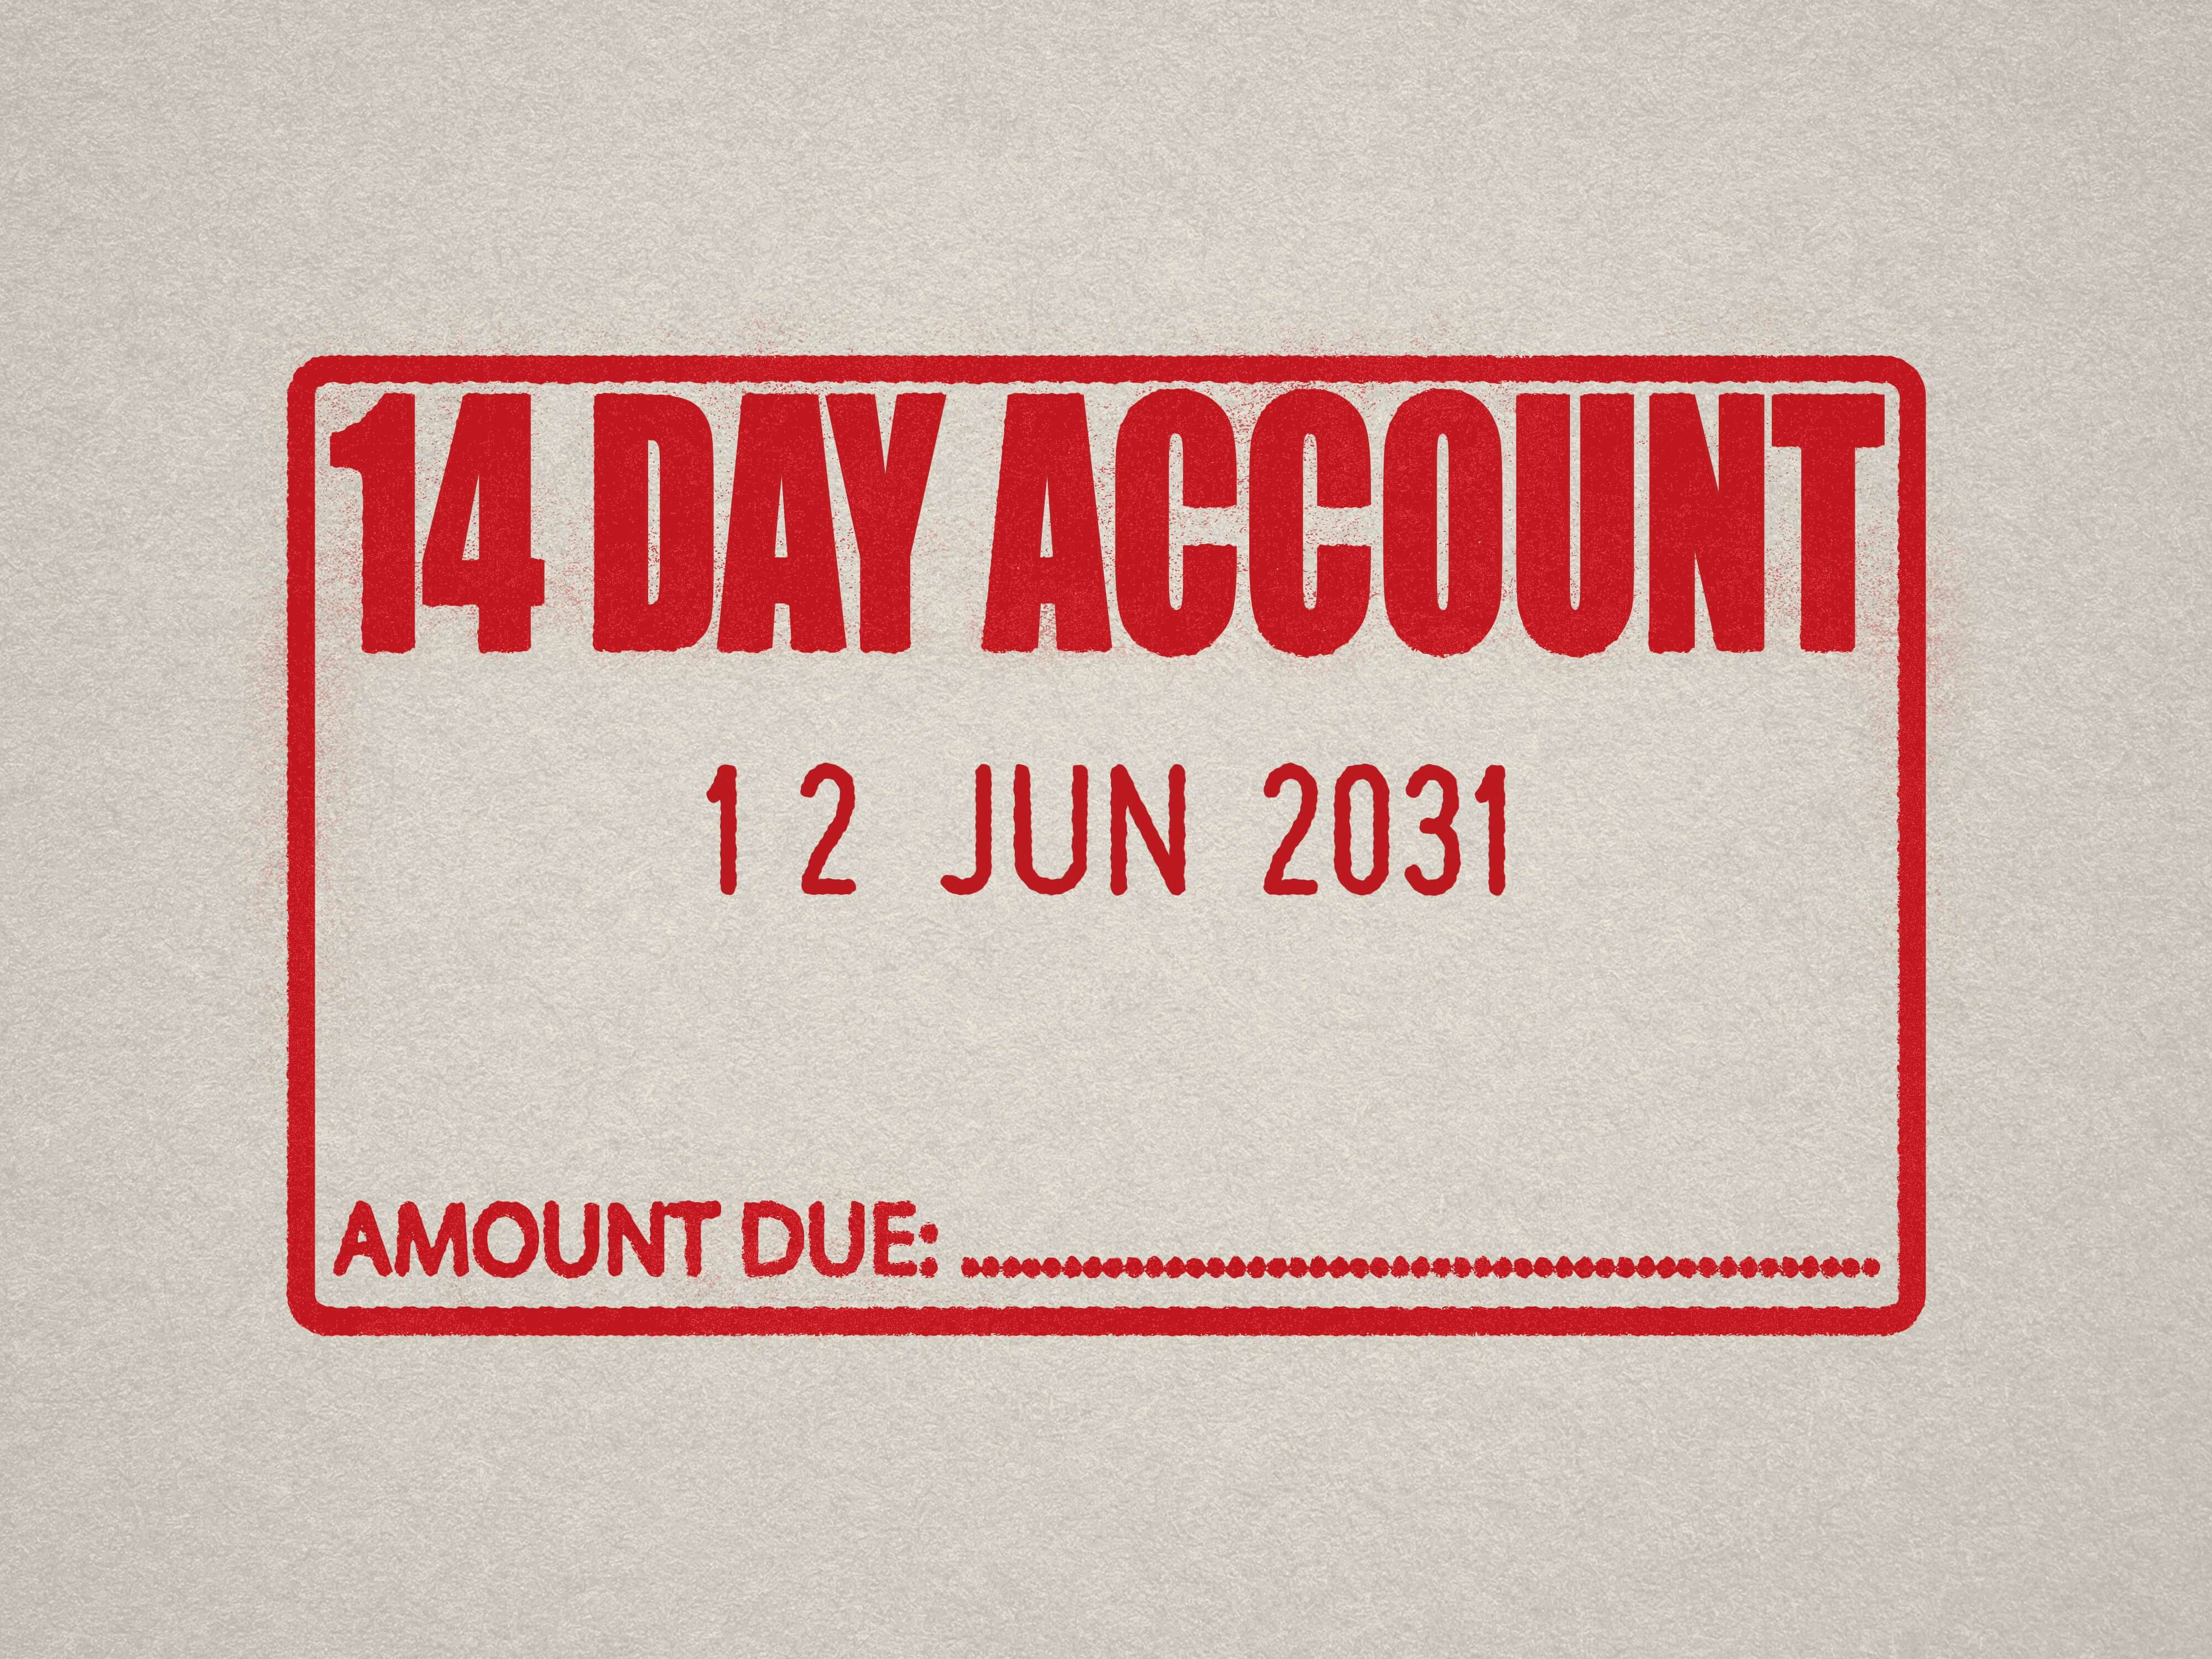 stamped print 14 day account